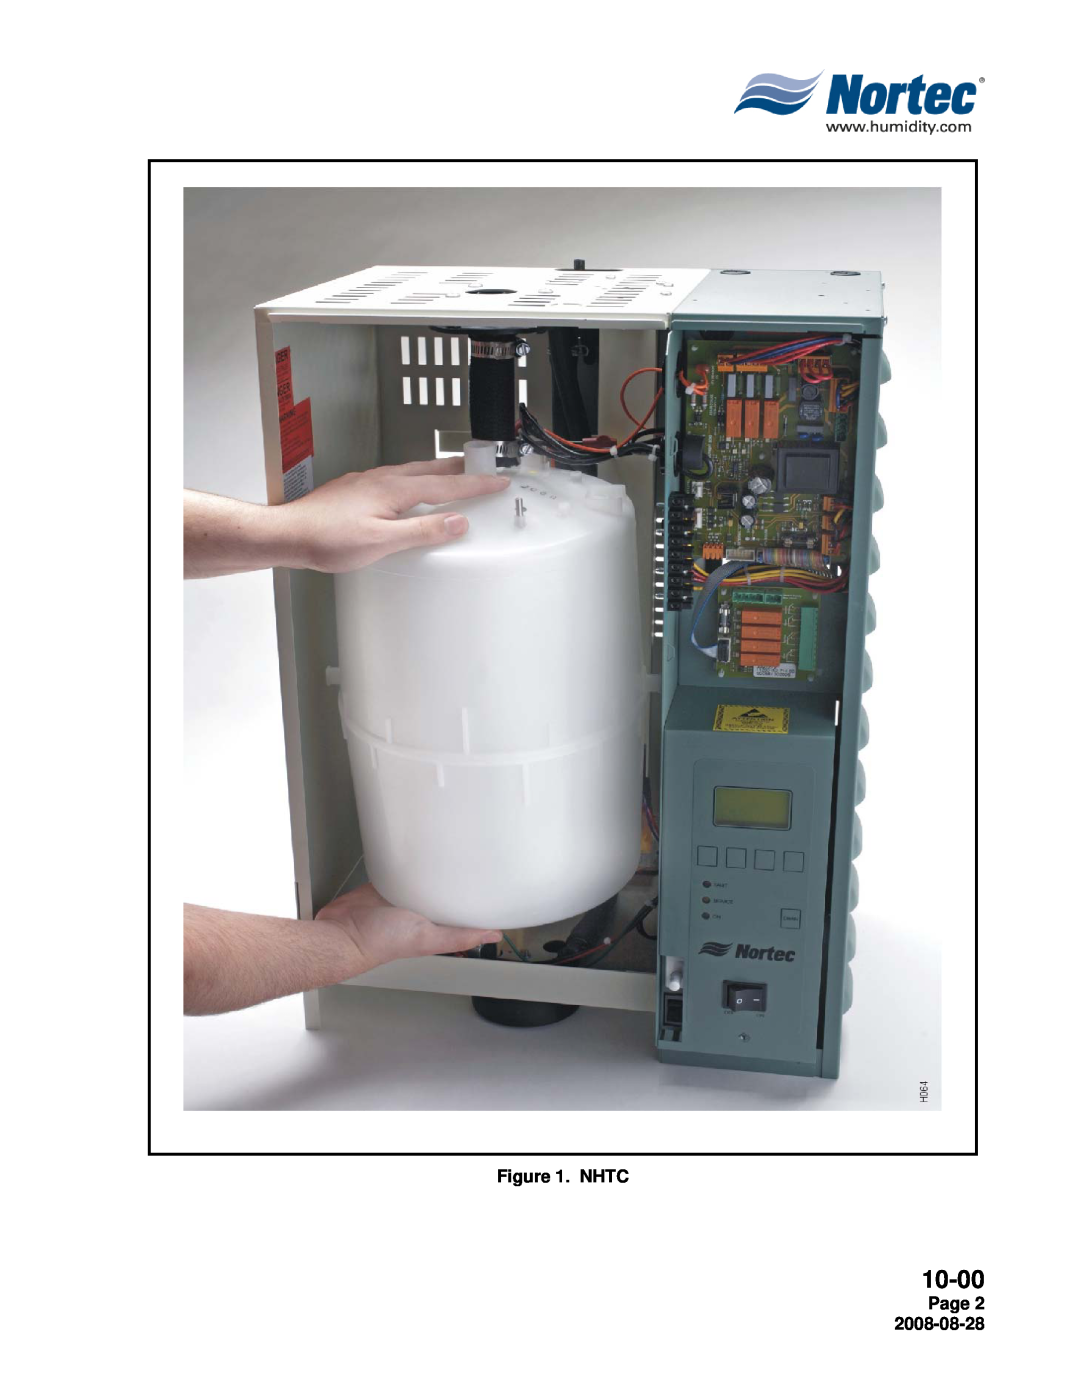 Nortec NH Series installation manual 10-00, Nhtc, Page 2 